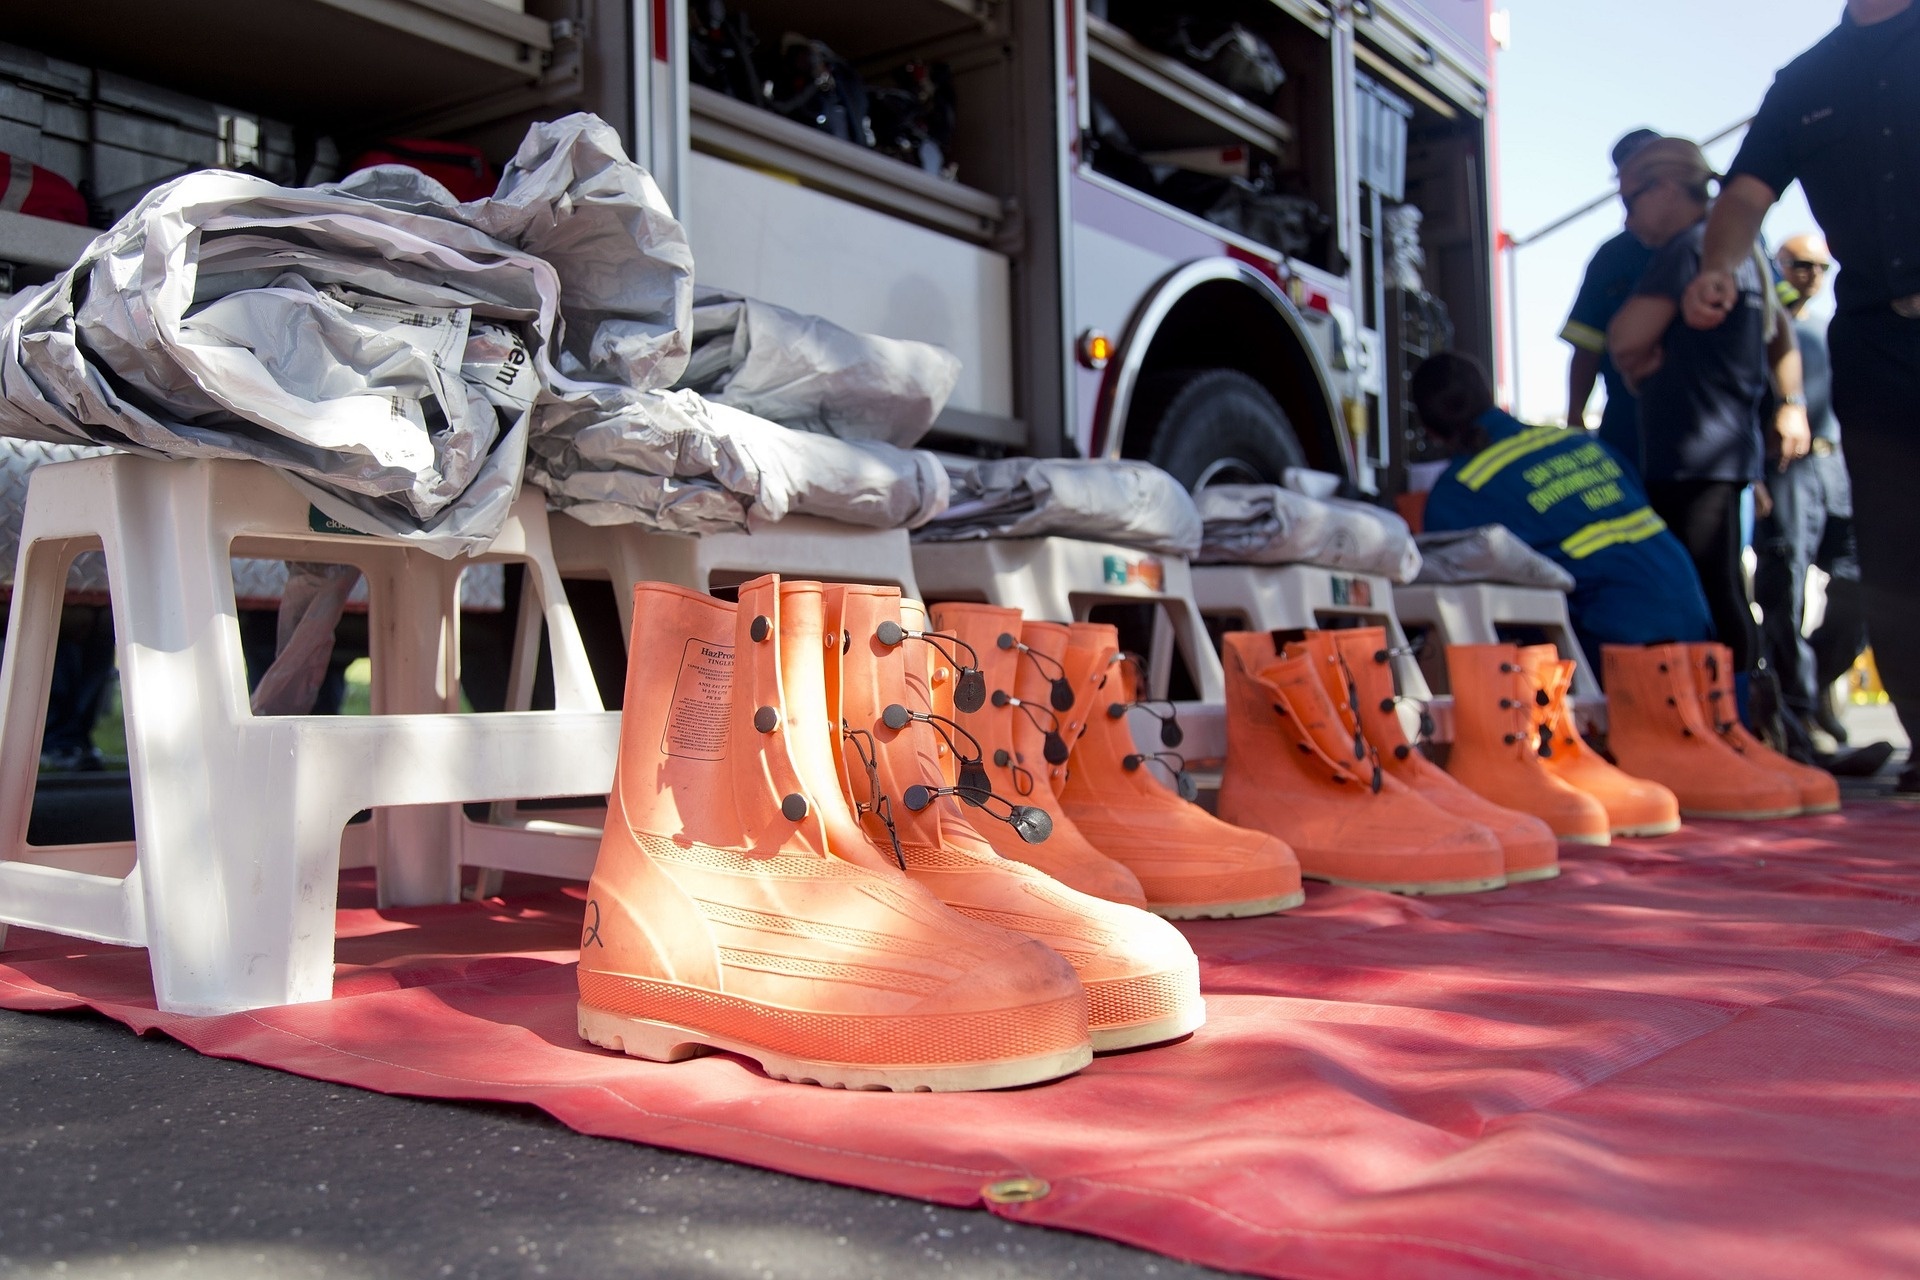 firefighters equipment boots free photo